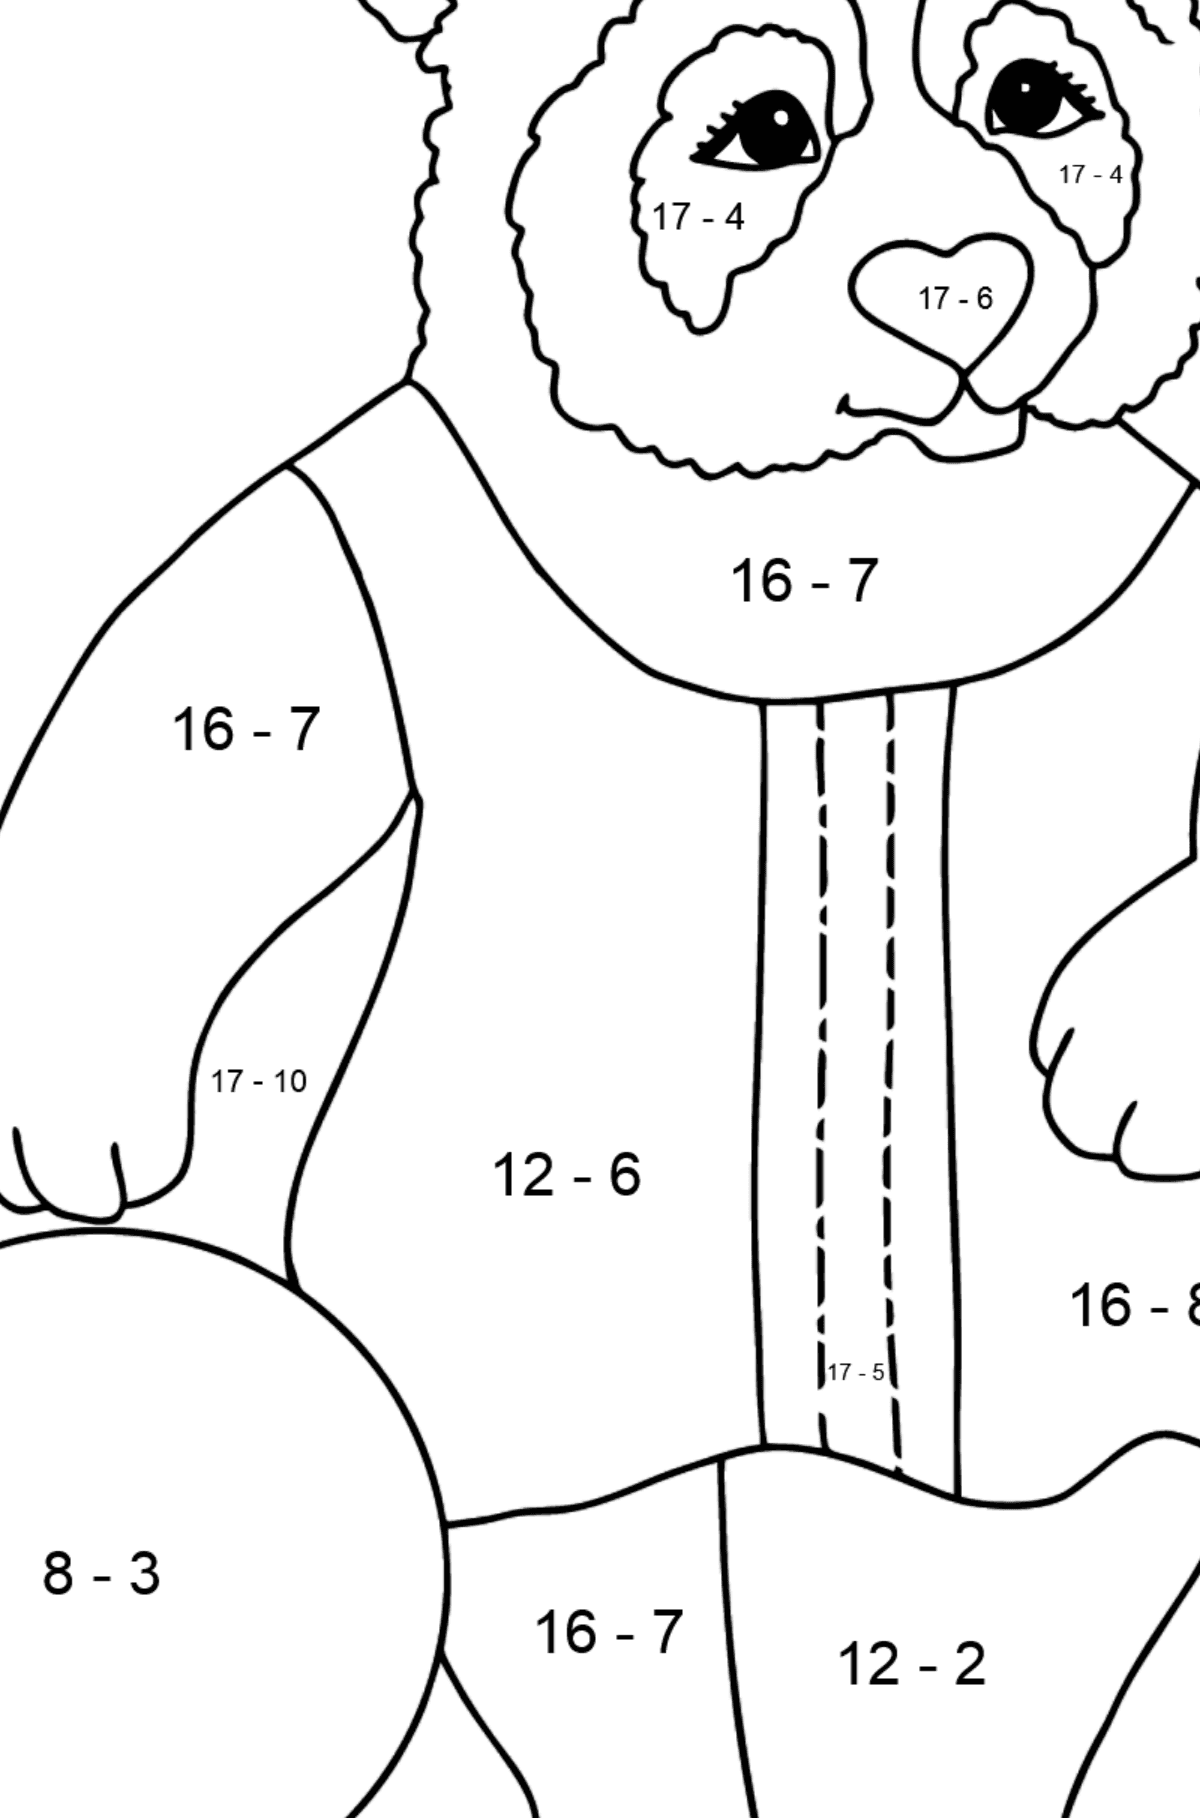 Panda For Babies coloring page - Math Coloring - Subtraction for Kids